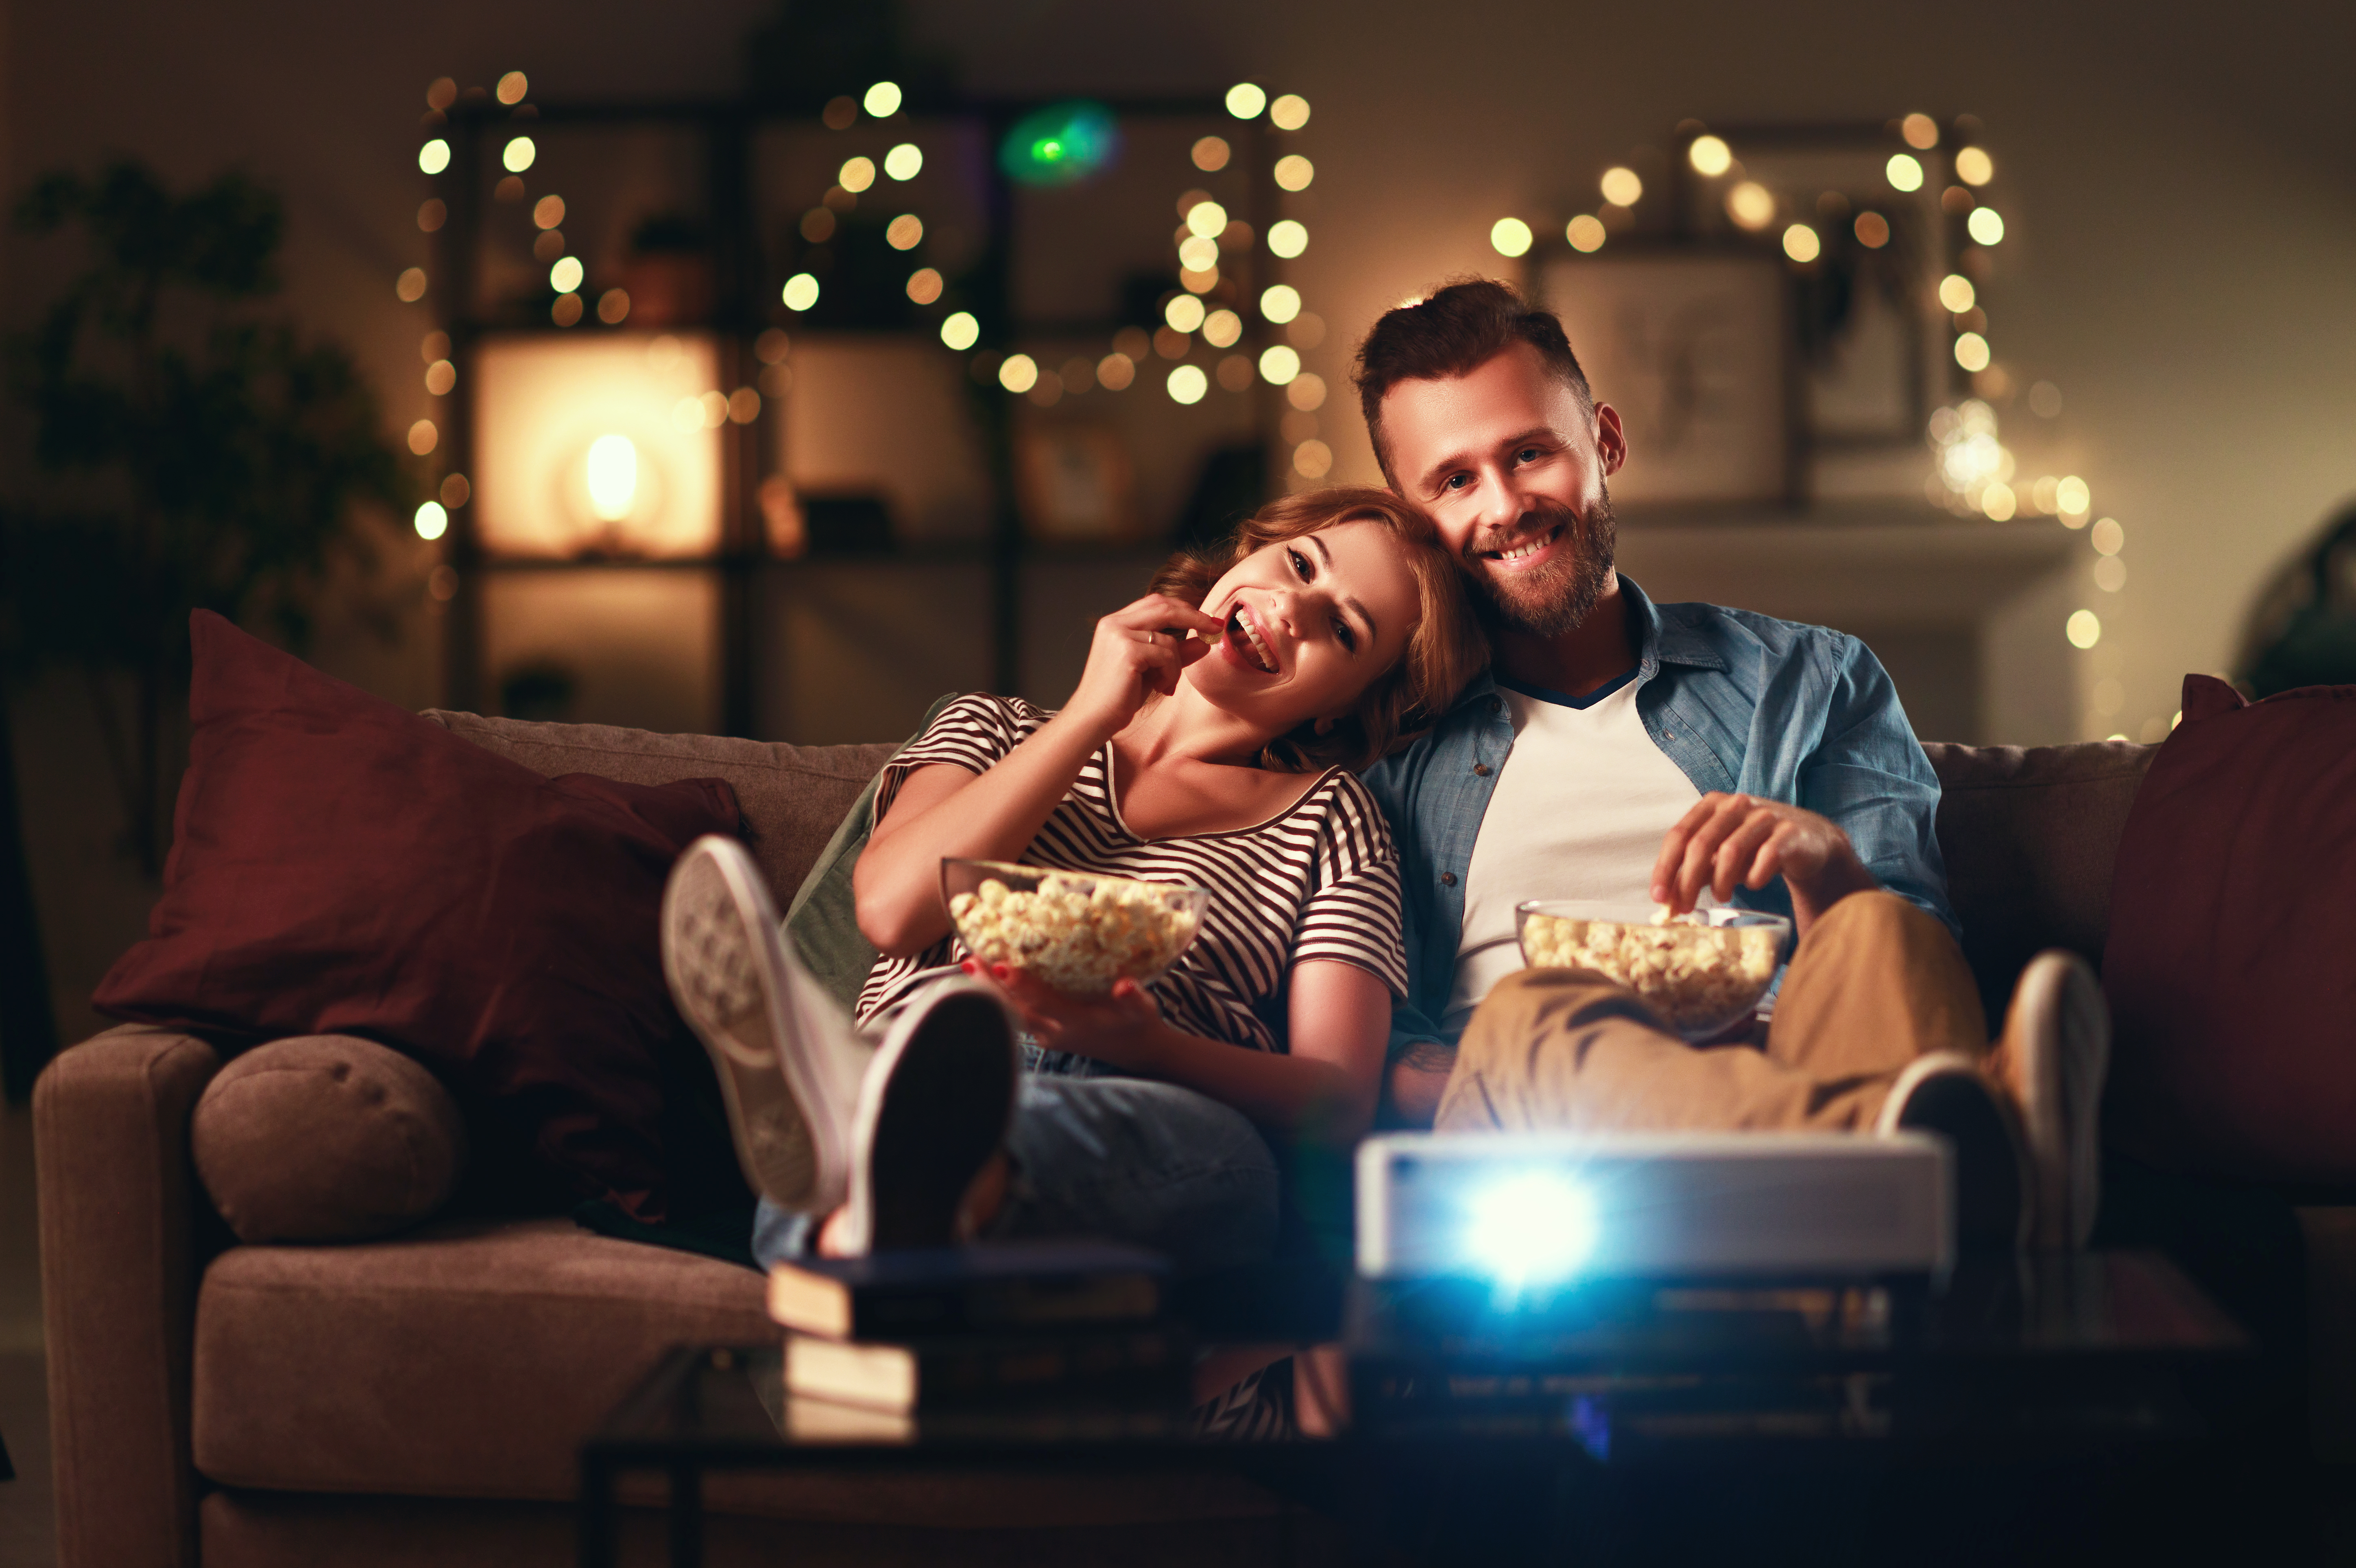 Man and woman watching a movie on a projector